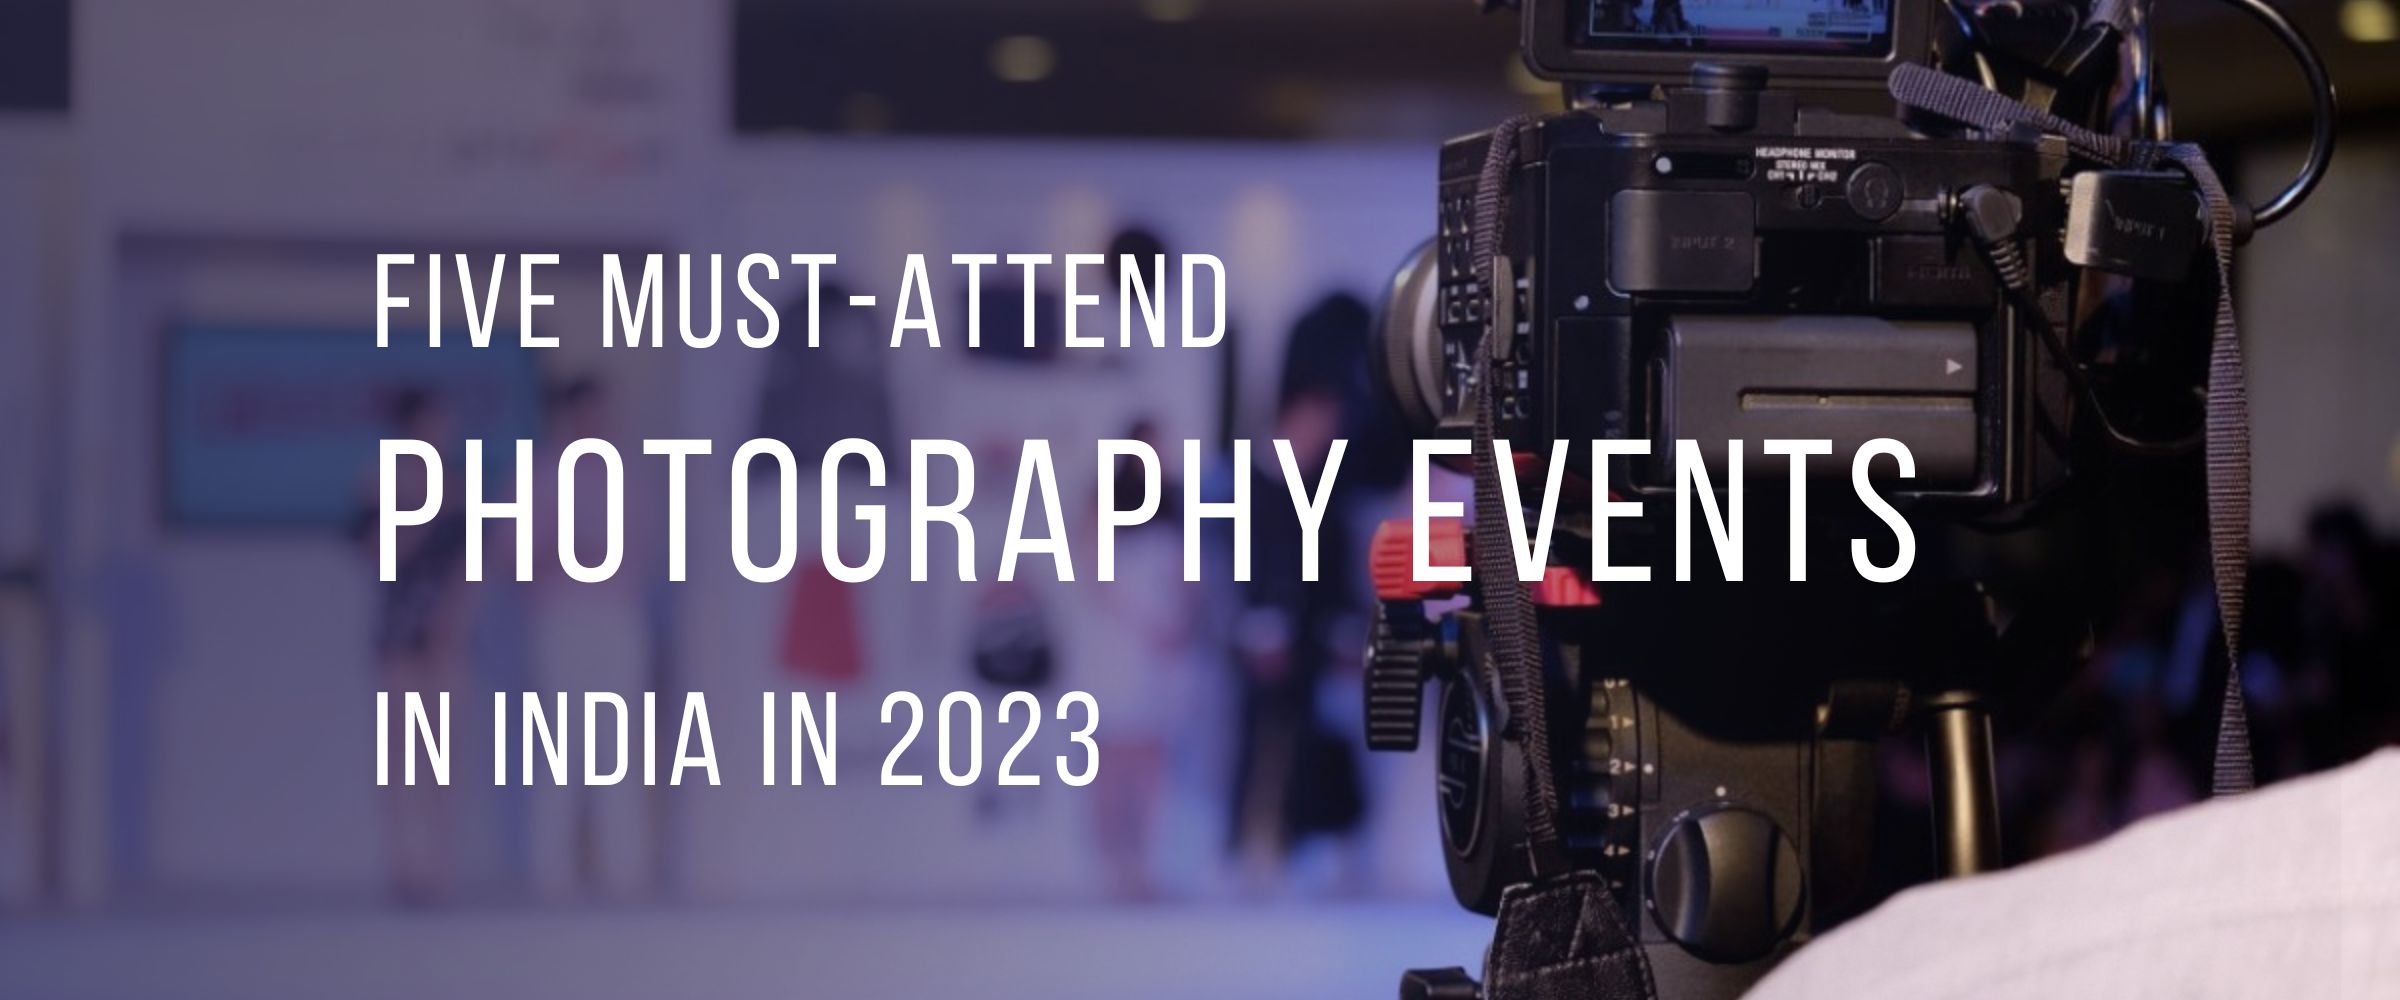 5 Must Attend Photography Events in India in 2023